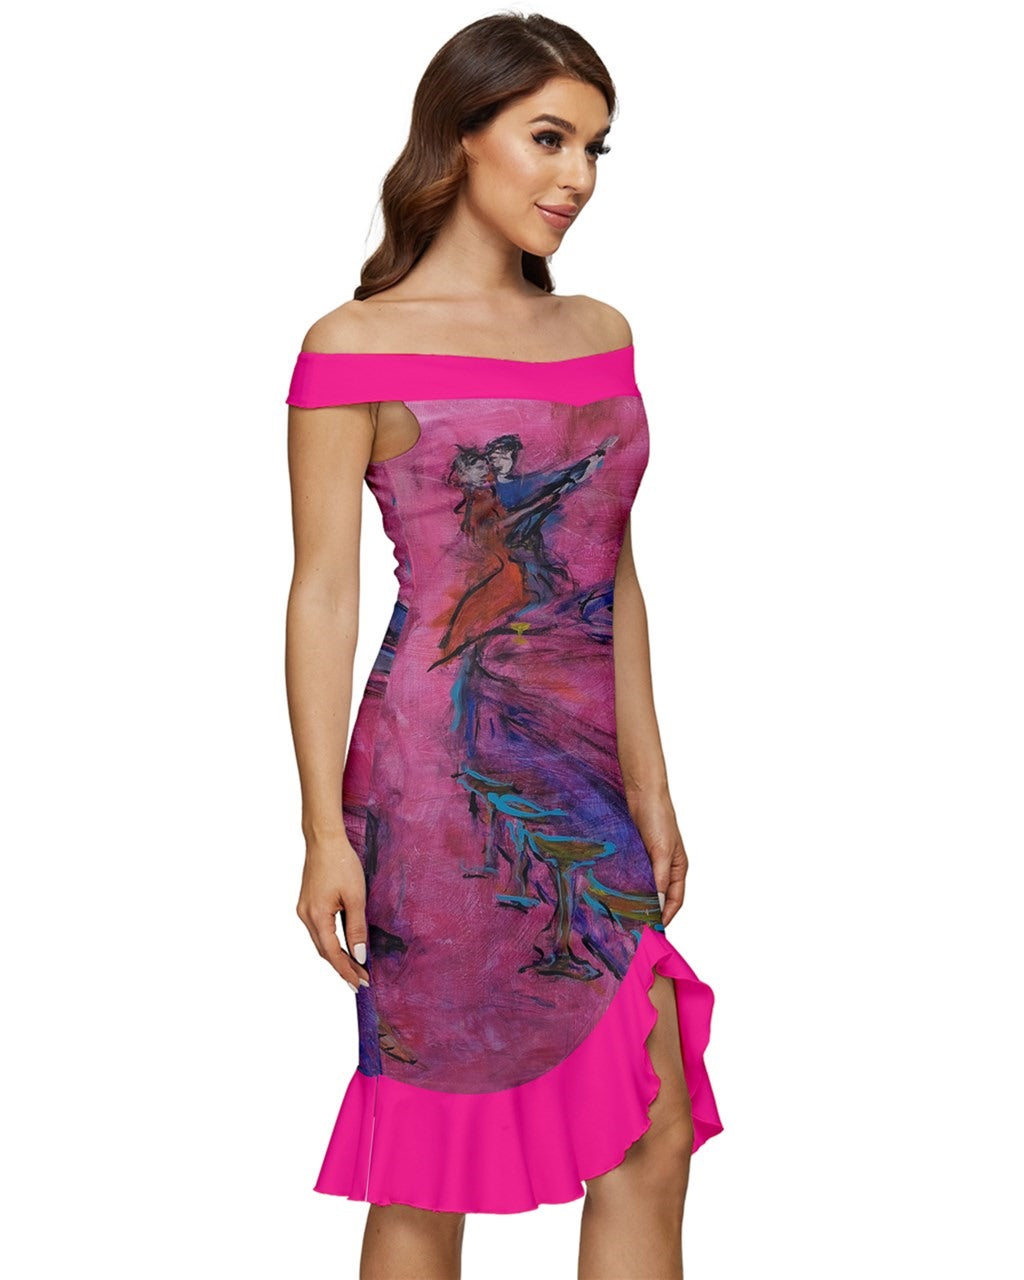 A stunning pink dress designed by Leeorah, featuring original art, perfect for lighting up the dance floor or commanding attention at any elegant event. Its figure-hugging silhouette embraces all sizes with flattering grace, promising to make you stand out amidst the crowd. Side view